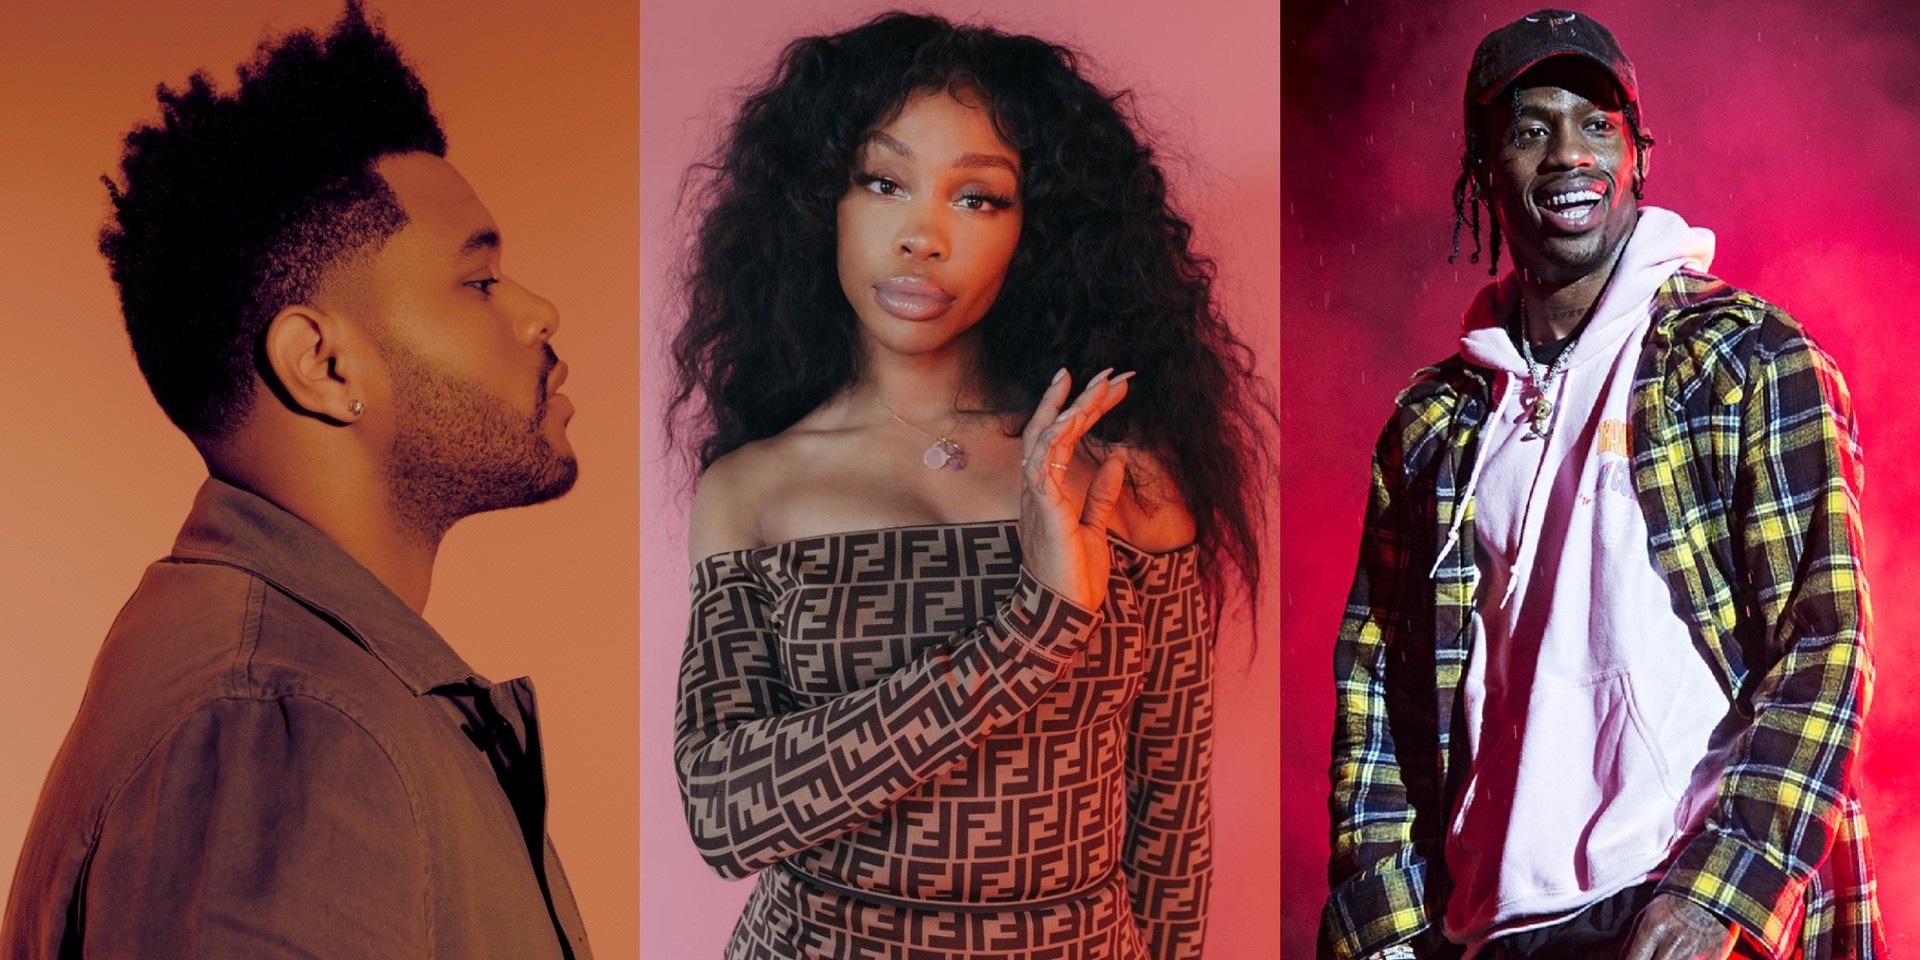 The Weeknd, SZA and Travis Scott are reportedly working on a track for Game of Thrones